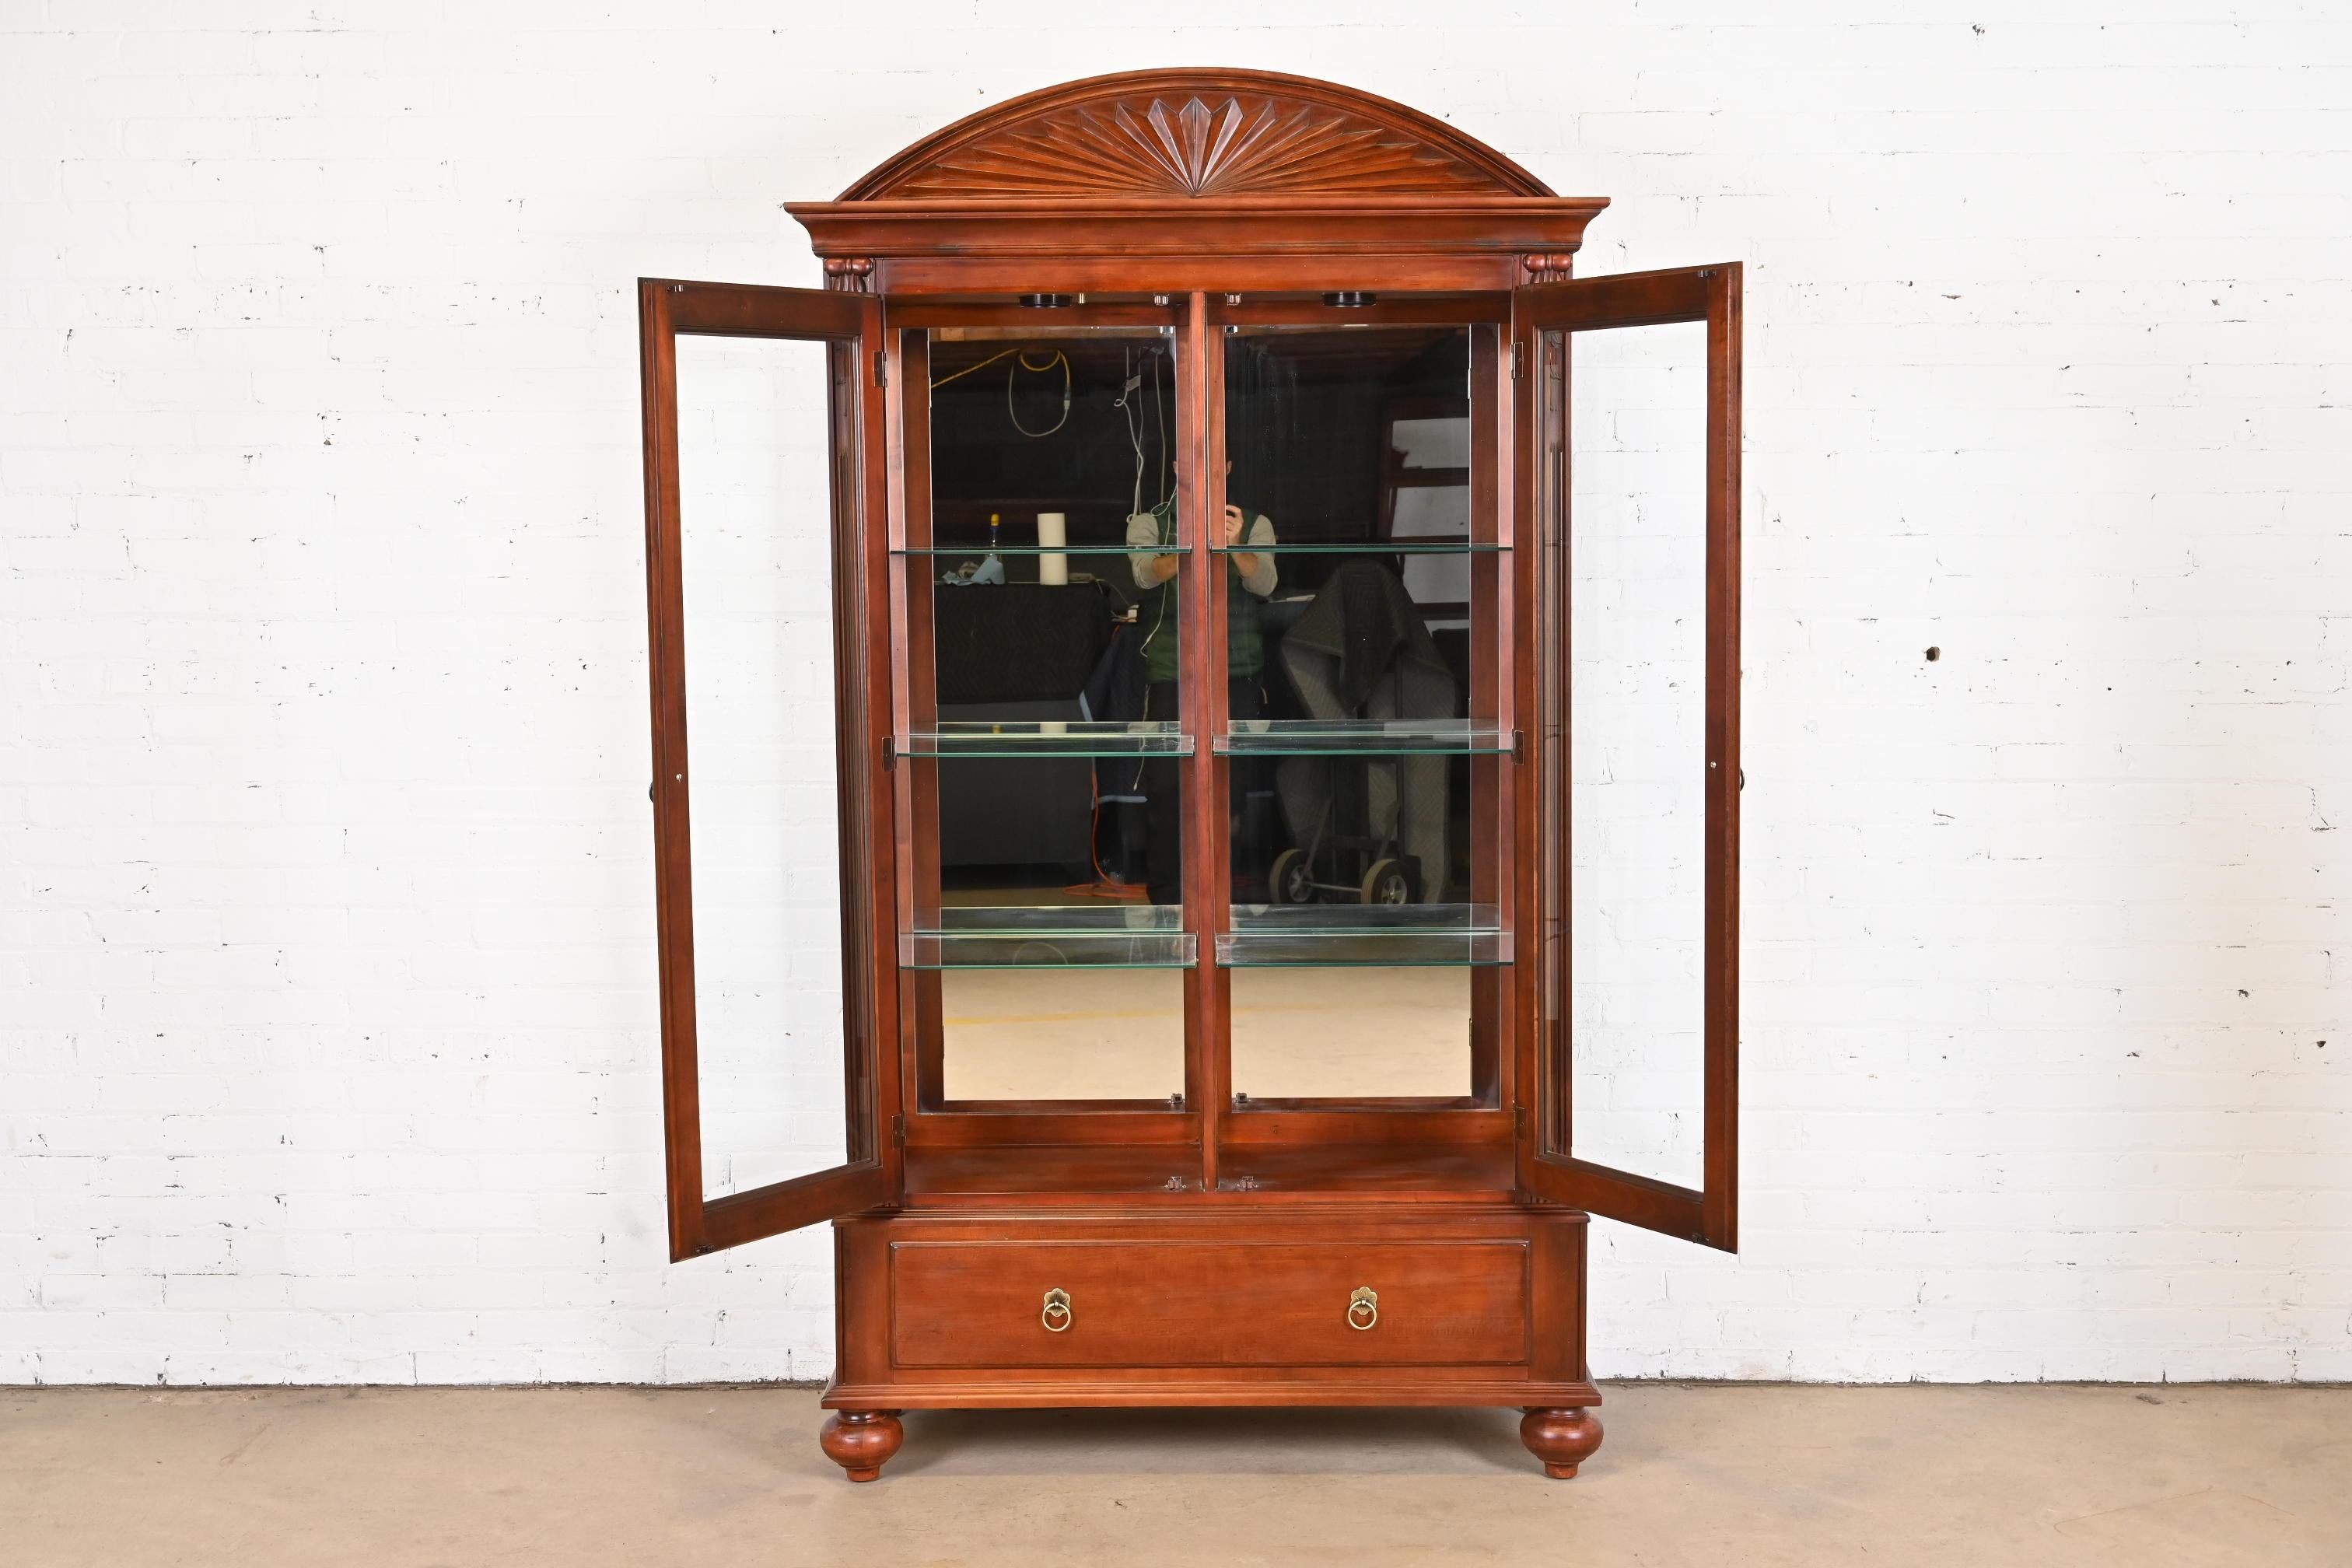 Ethan Allen British Colonial Cherry Wood Lighted Bookcase or Display Cabinet 1